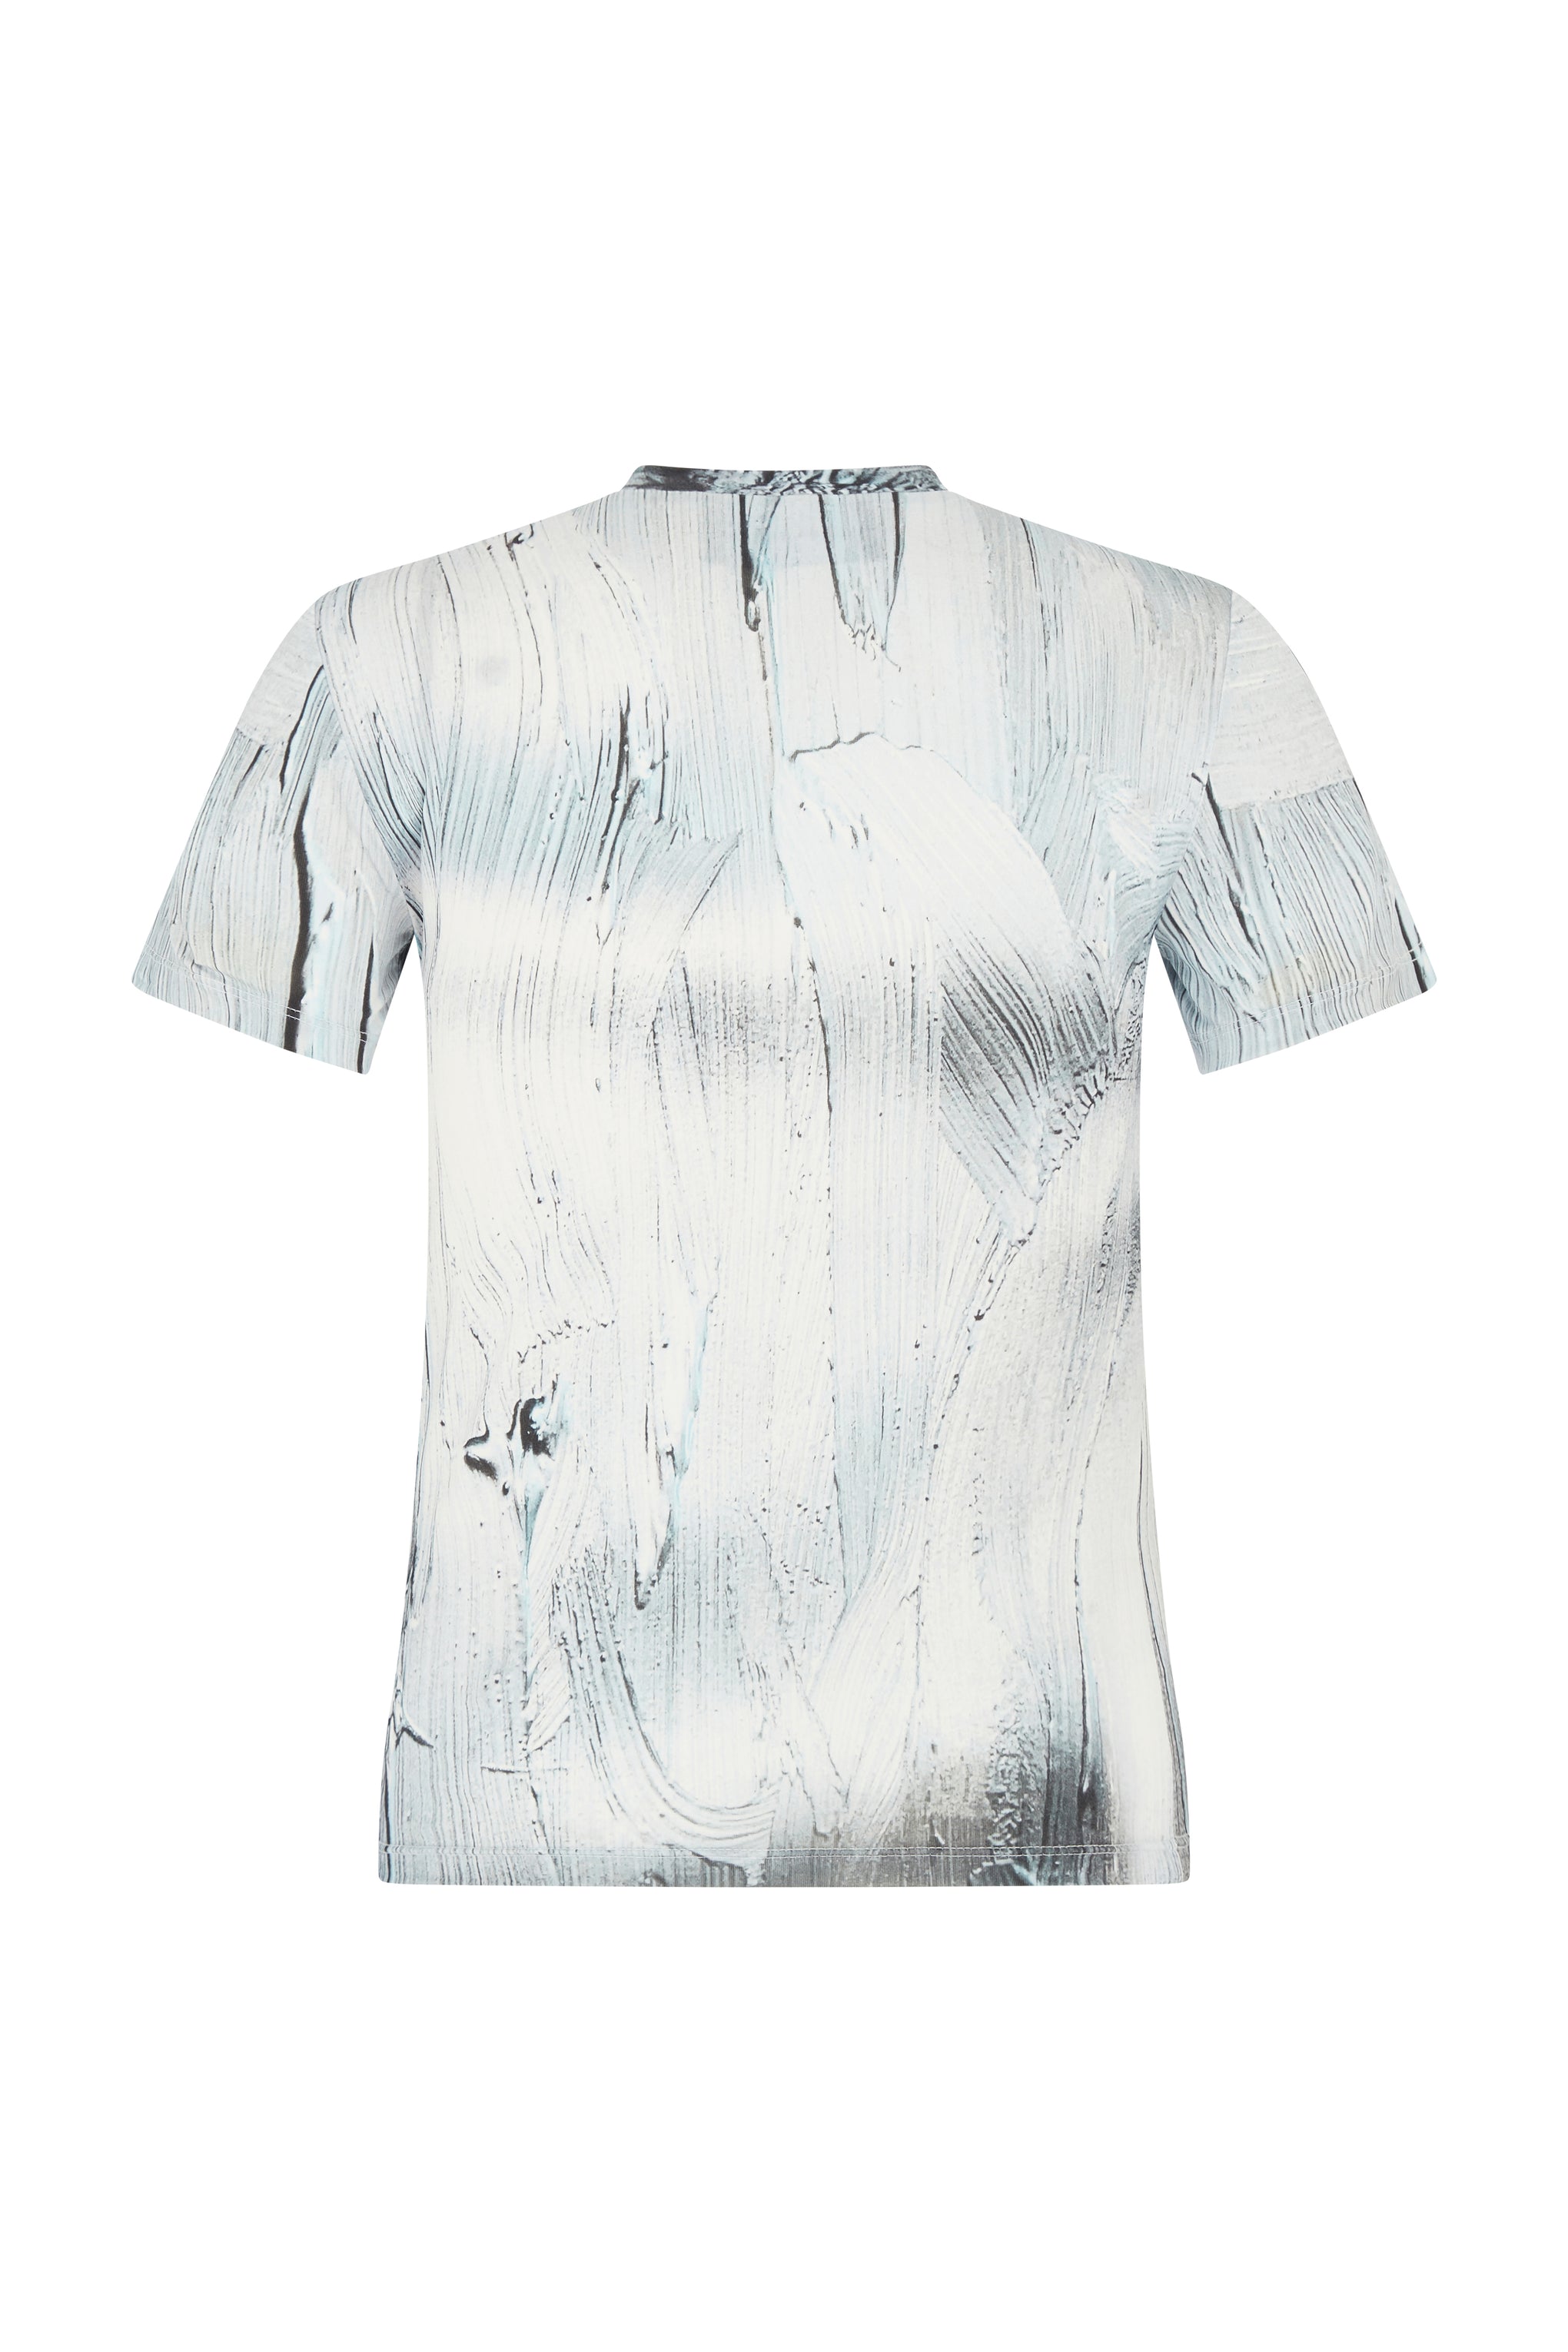 Louisa Ballou Beach Tee in Painted Silver available at TNT The New Trend Australia